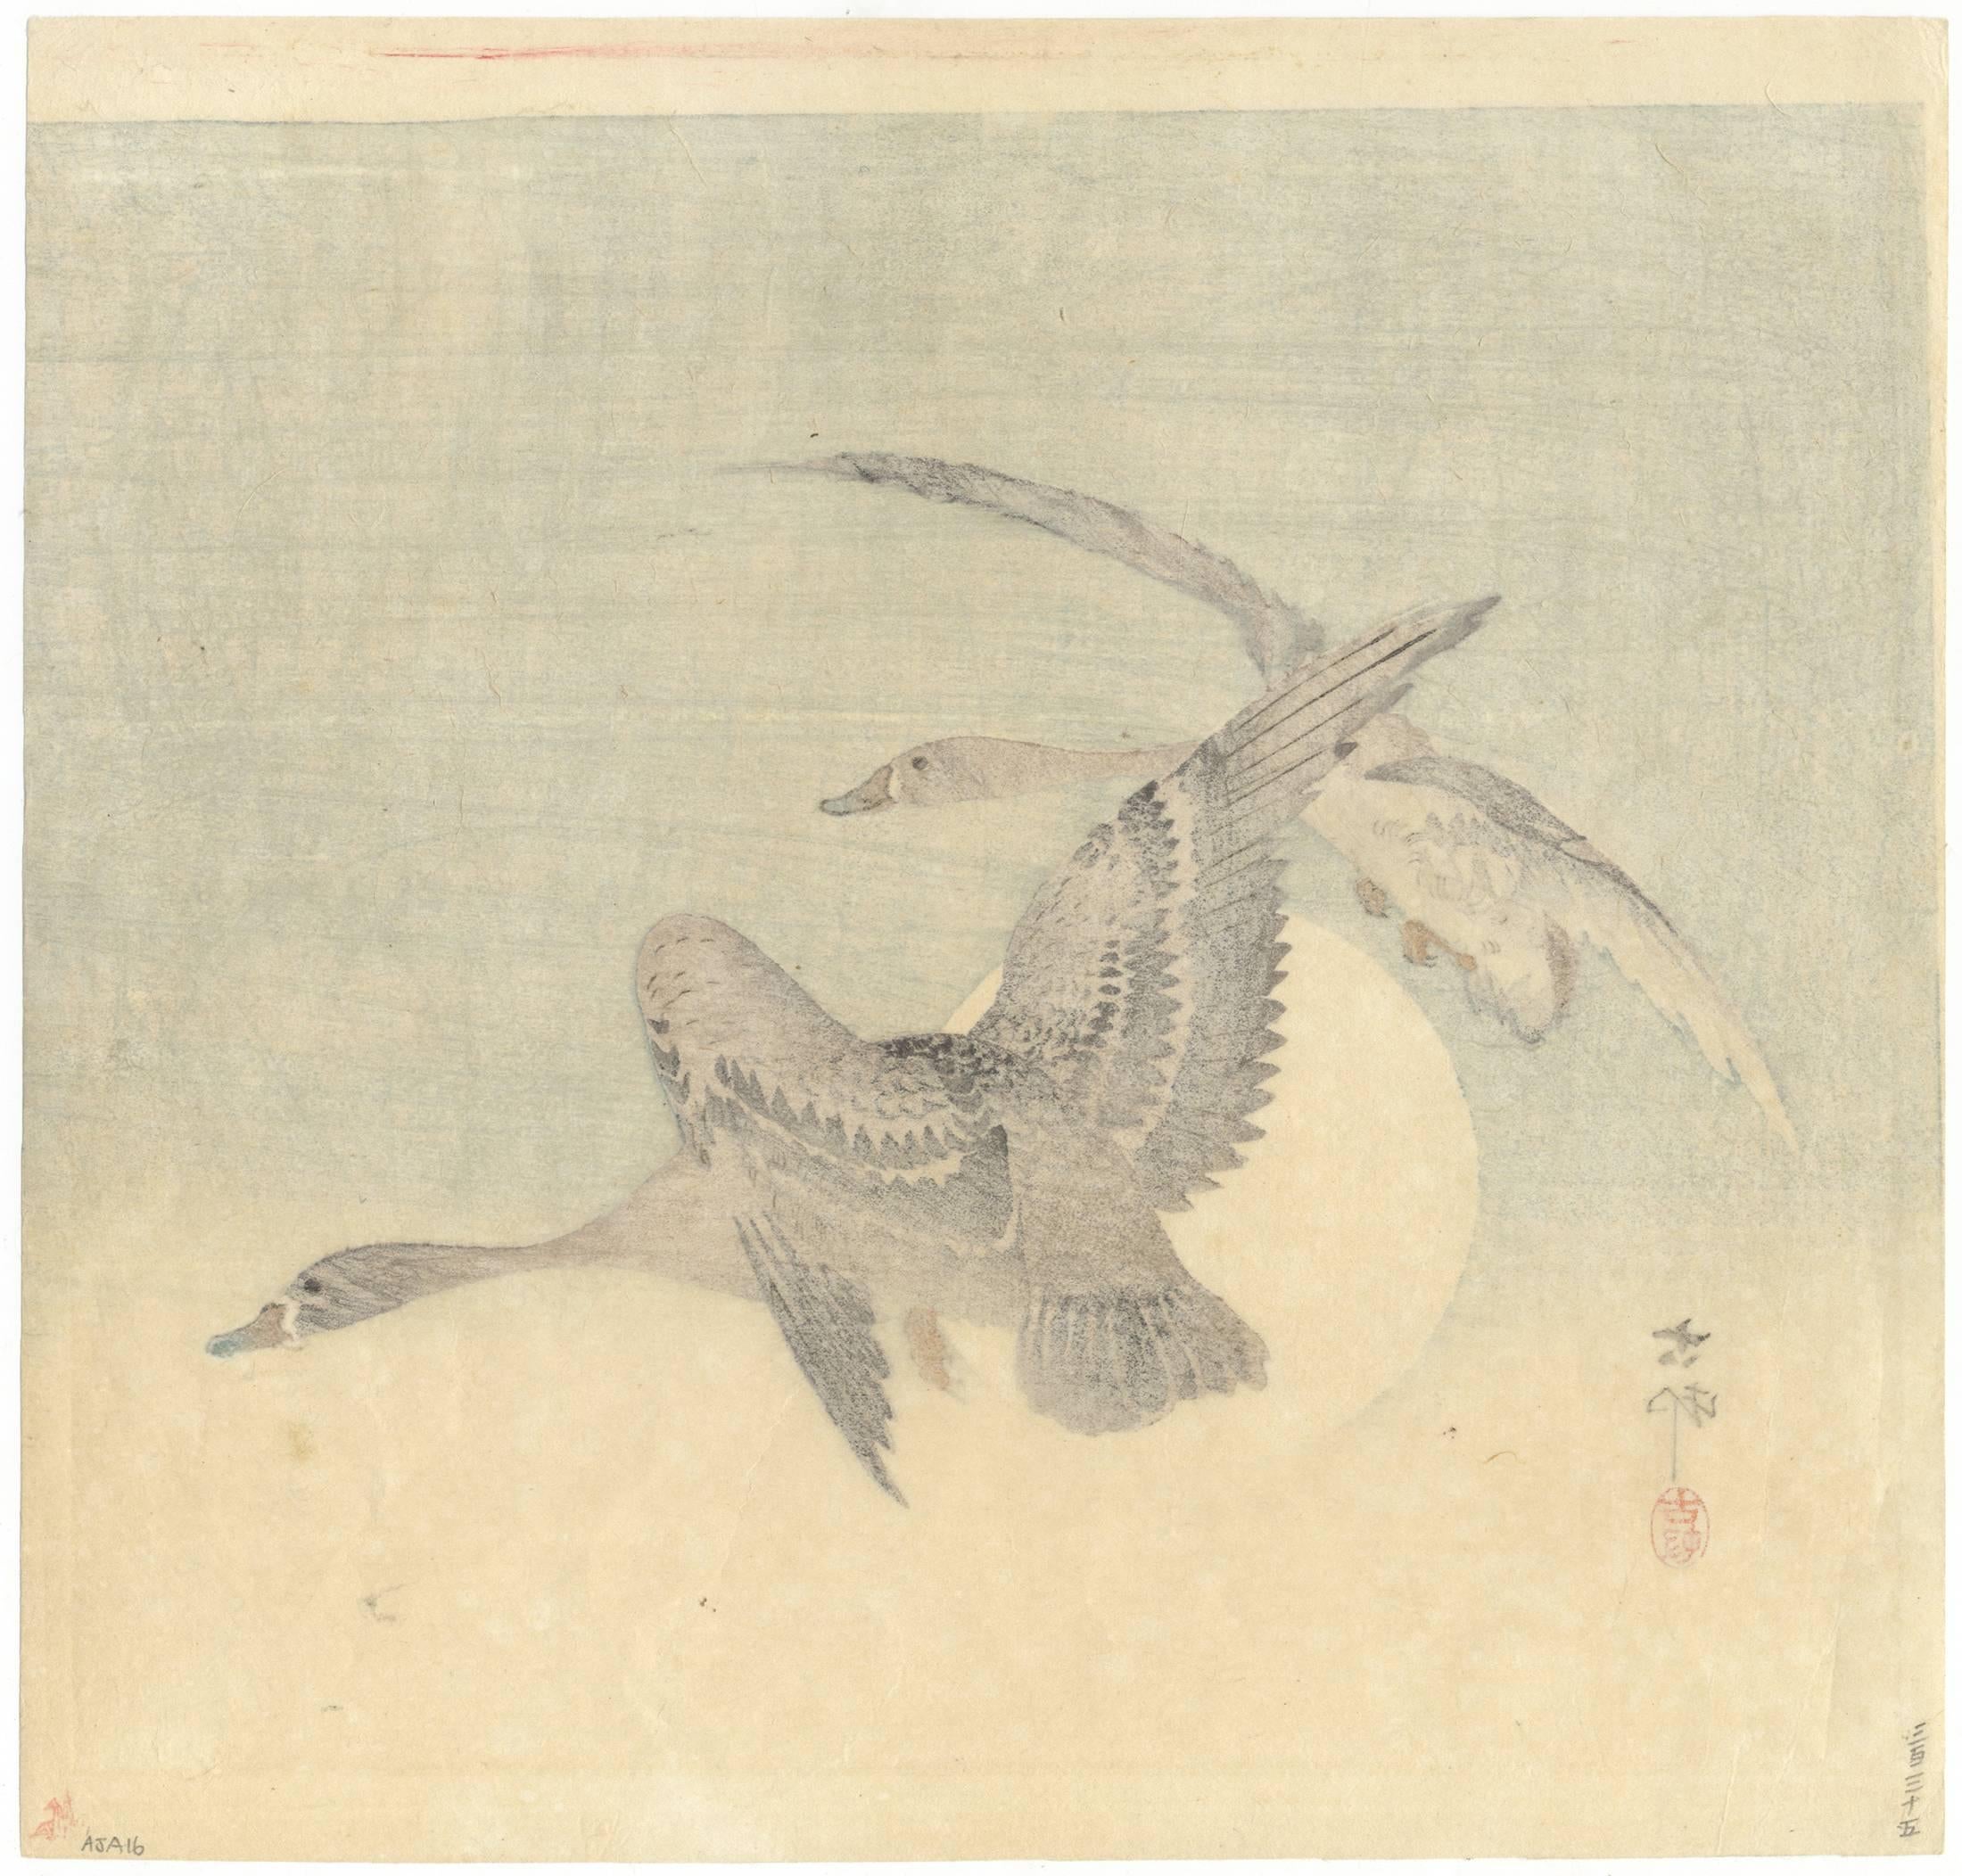 Artist: Ohara Koson (1877-1945)
Title: Two white-fronted geese in flight
Date: Early 20th century
Publisher: Daikoku-ya
Size: 24.1 x 25.1 cm
Condition report: Discolouration due to the previous mounting. Pencil marking on the back. Horizontal